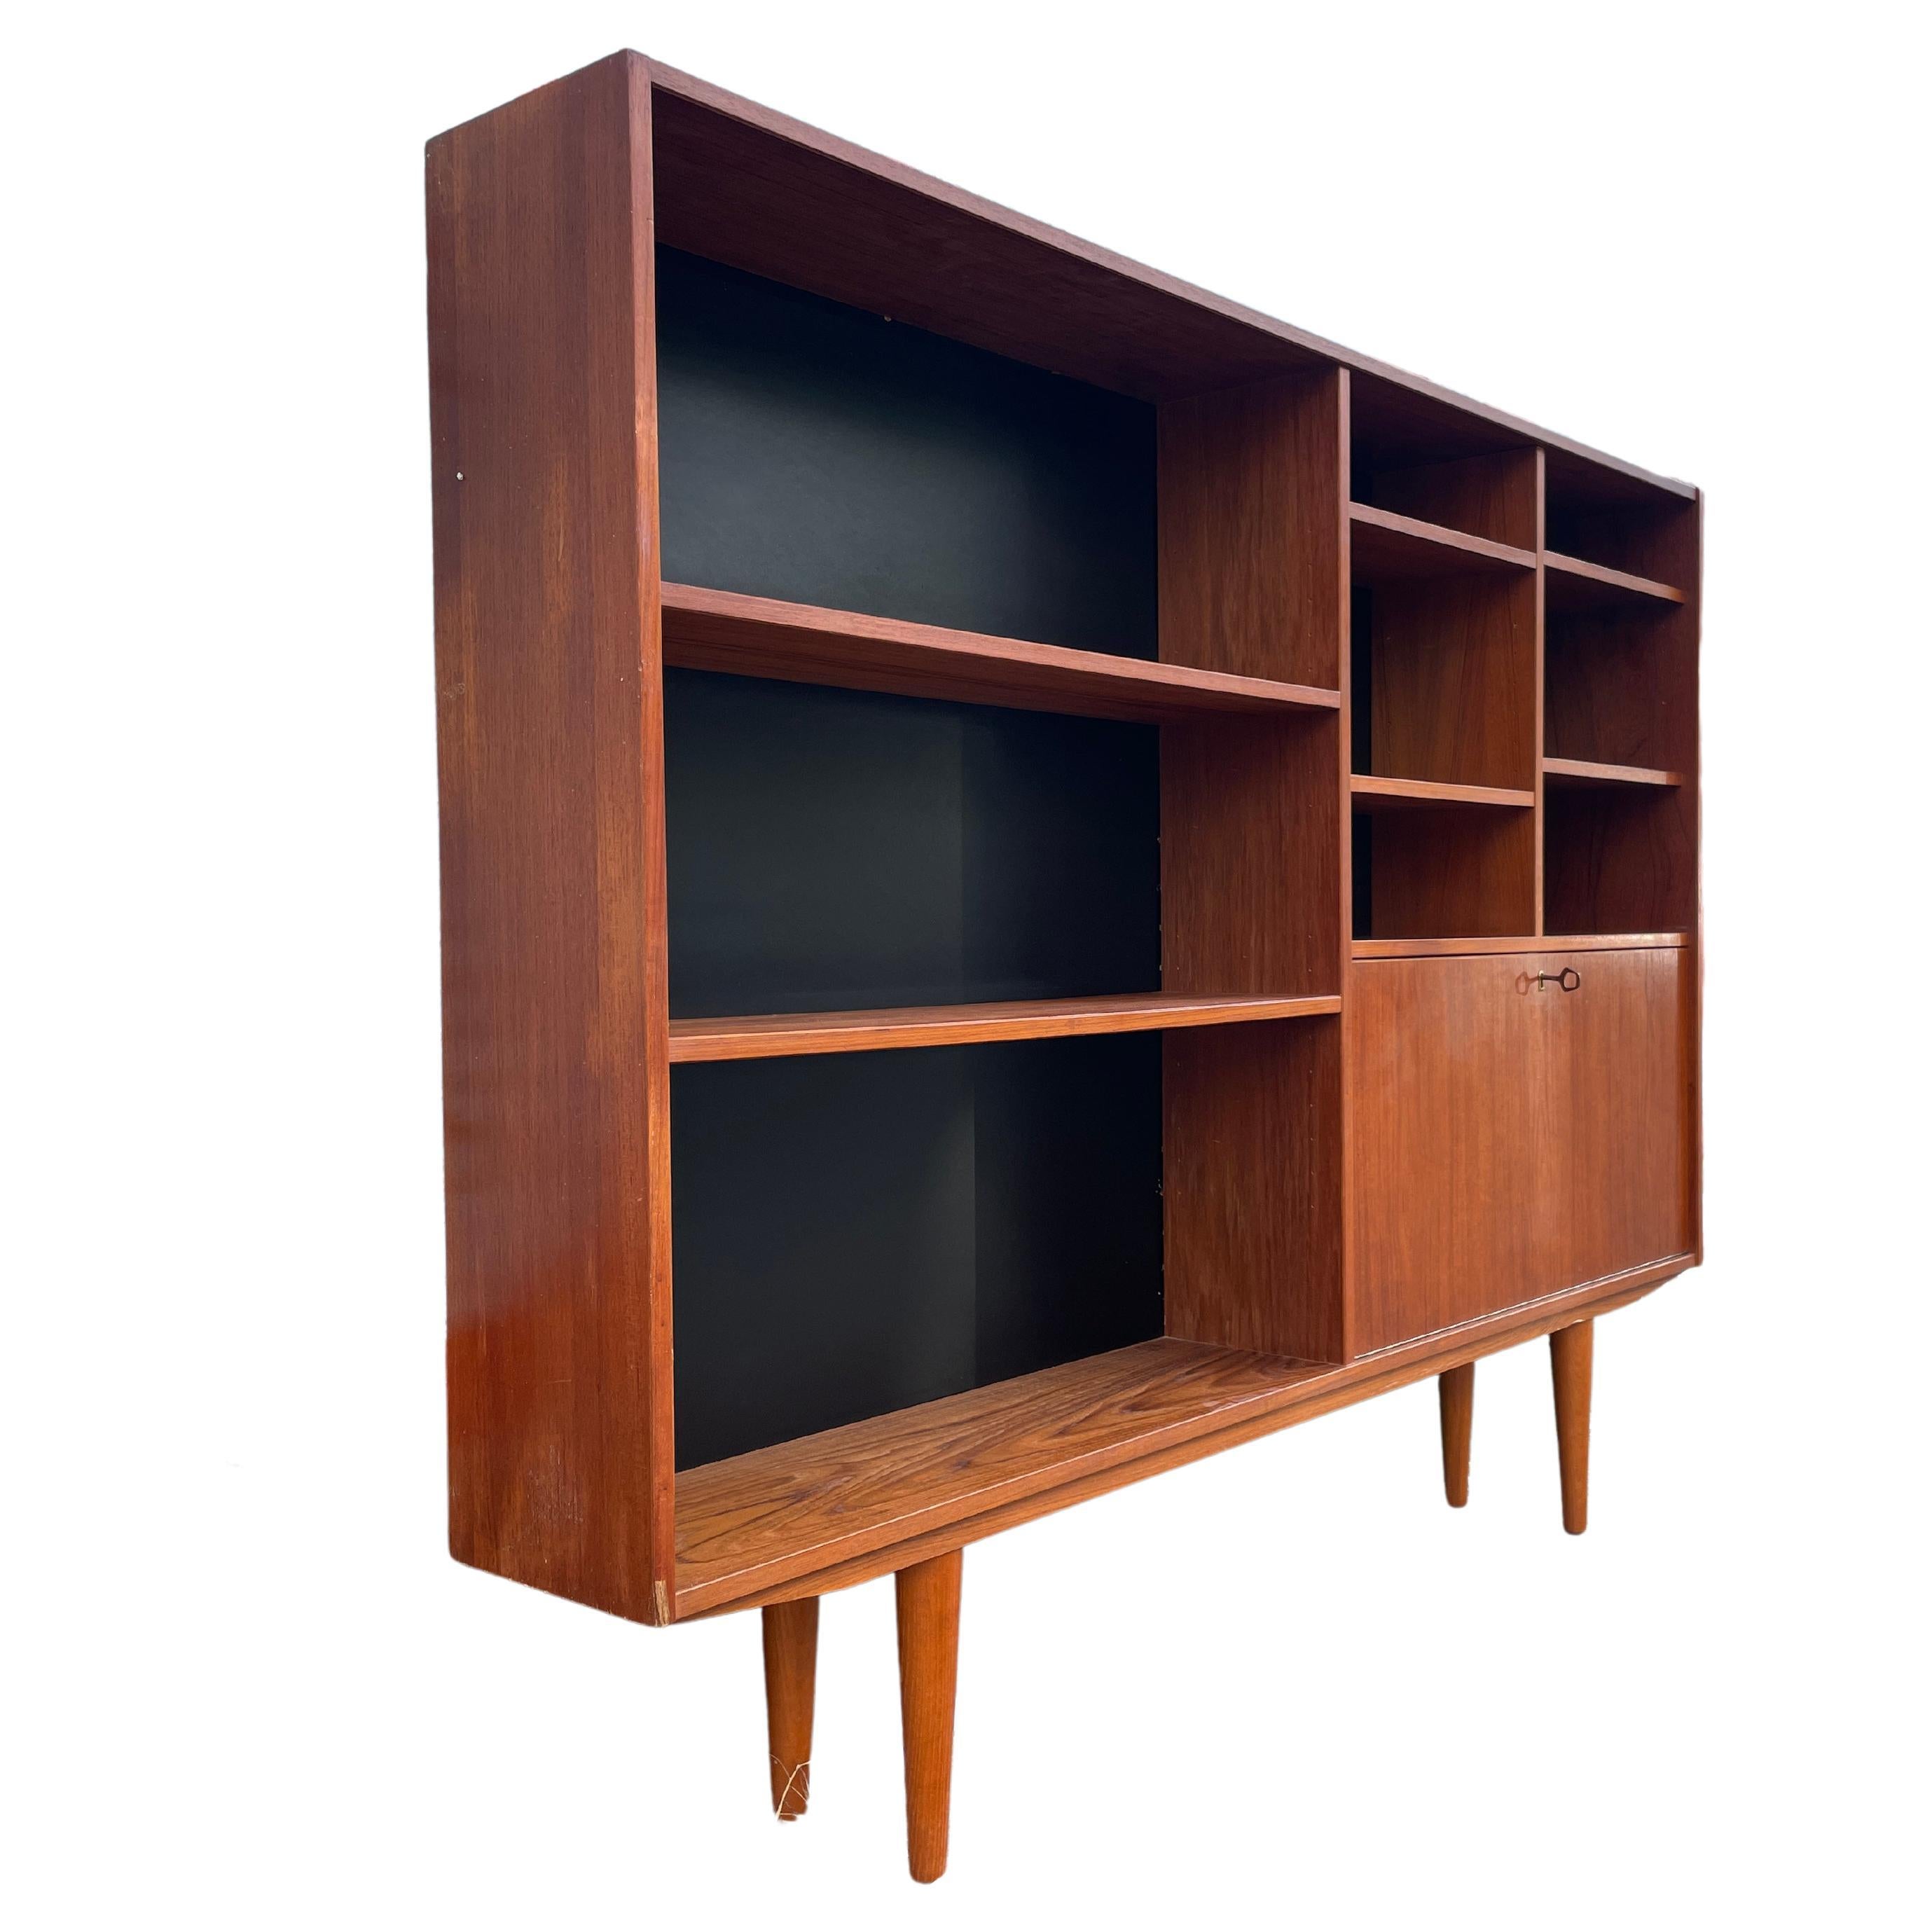 Mid-century teak wood wide and slim bookcase with 6 adjustable shelves and a lower right locking bar or desk storage area. Black backing with Slim design and sits on 4 tapered teak legs. Made In Denmark. Has original key. Located in Brooklyn